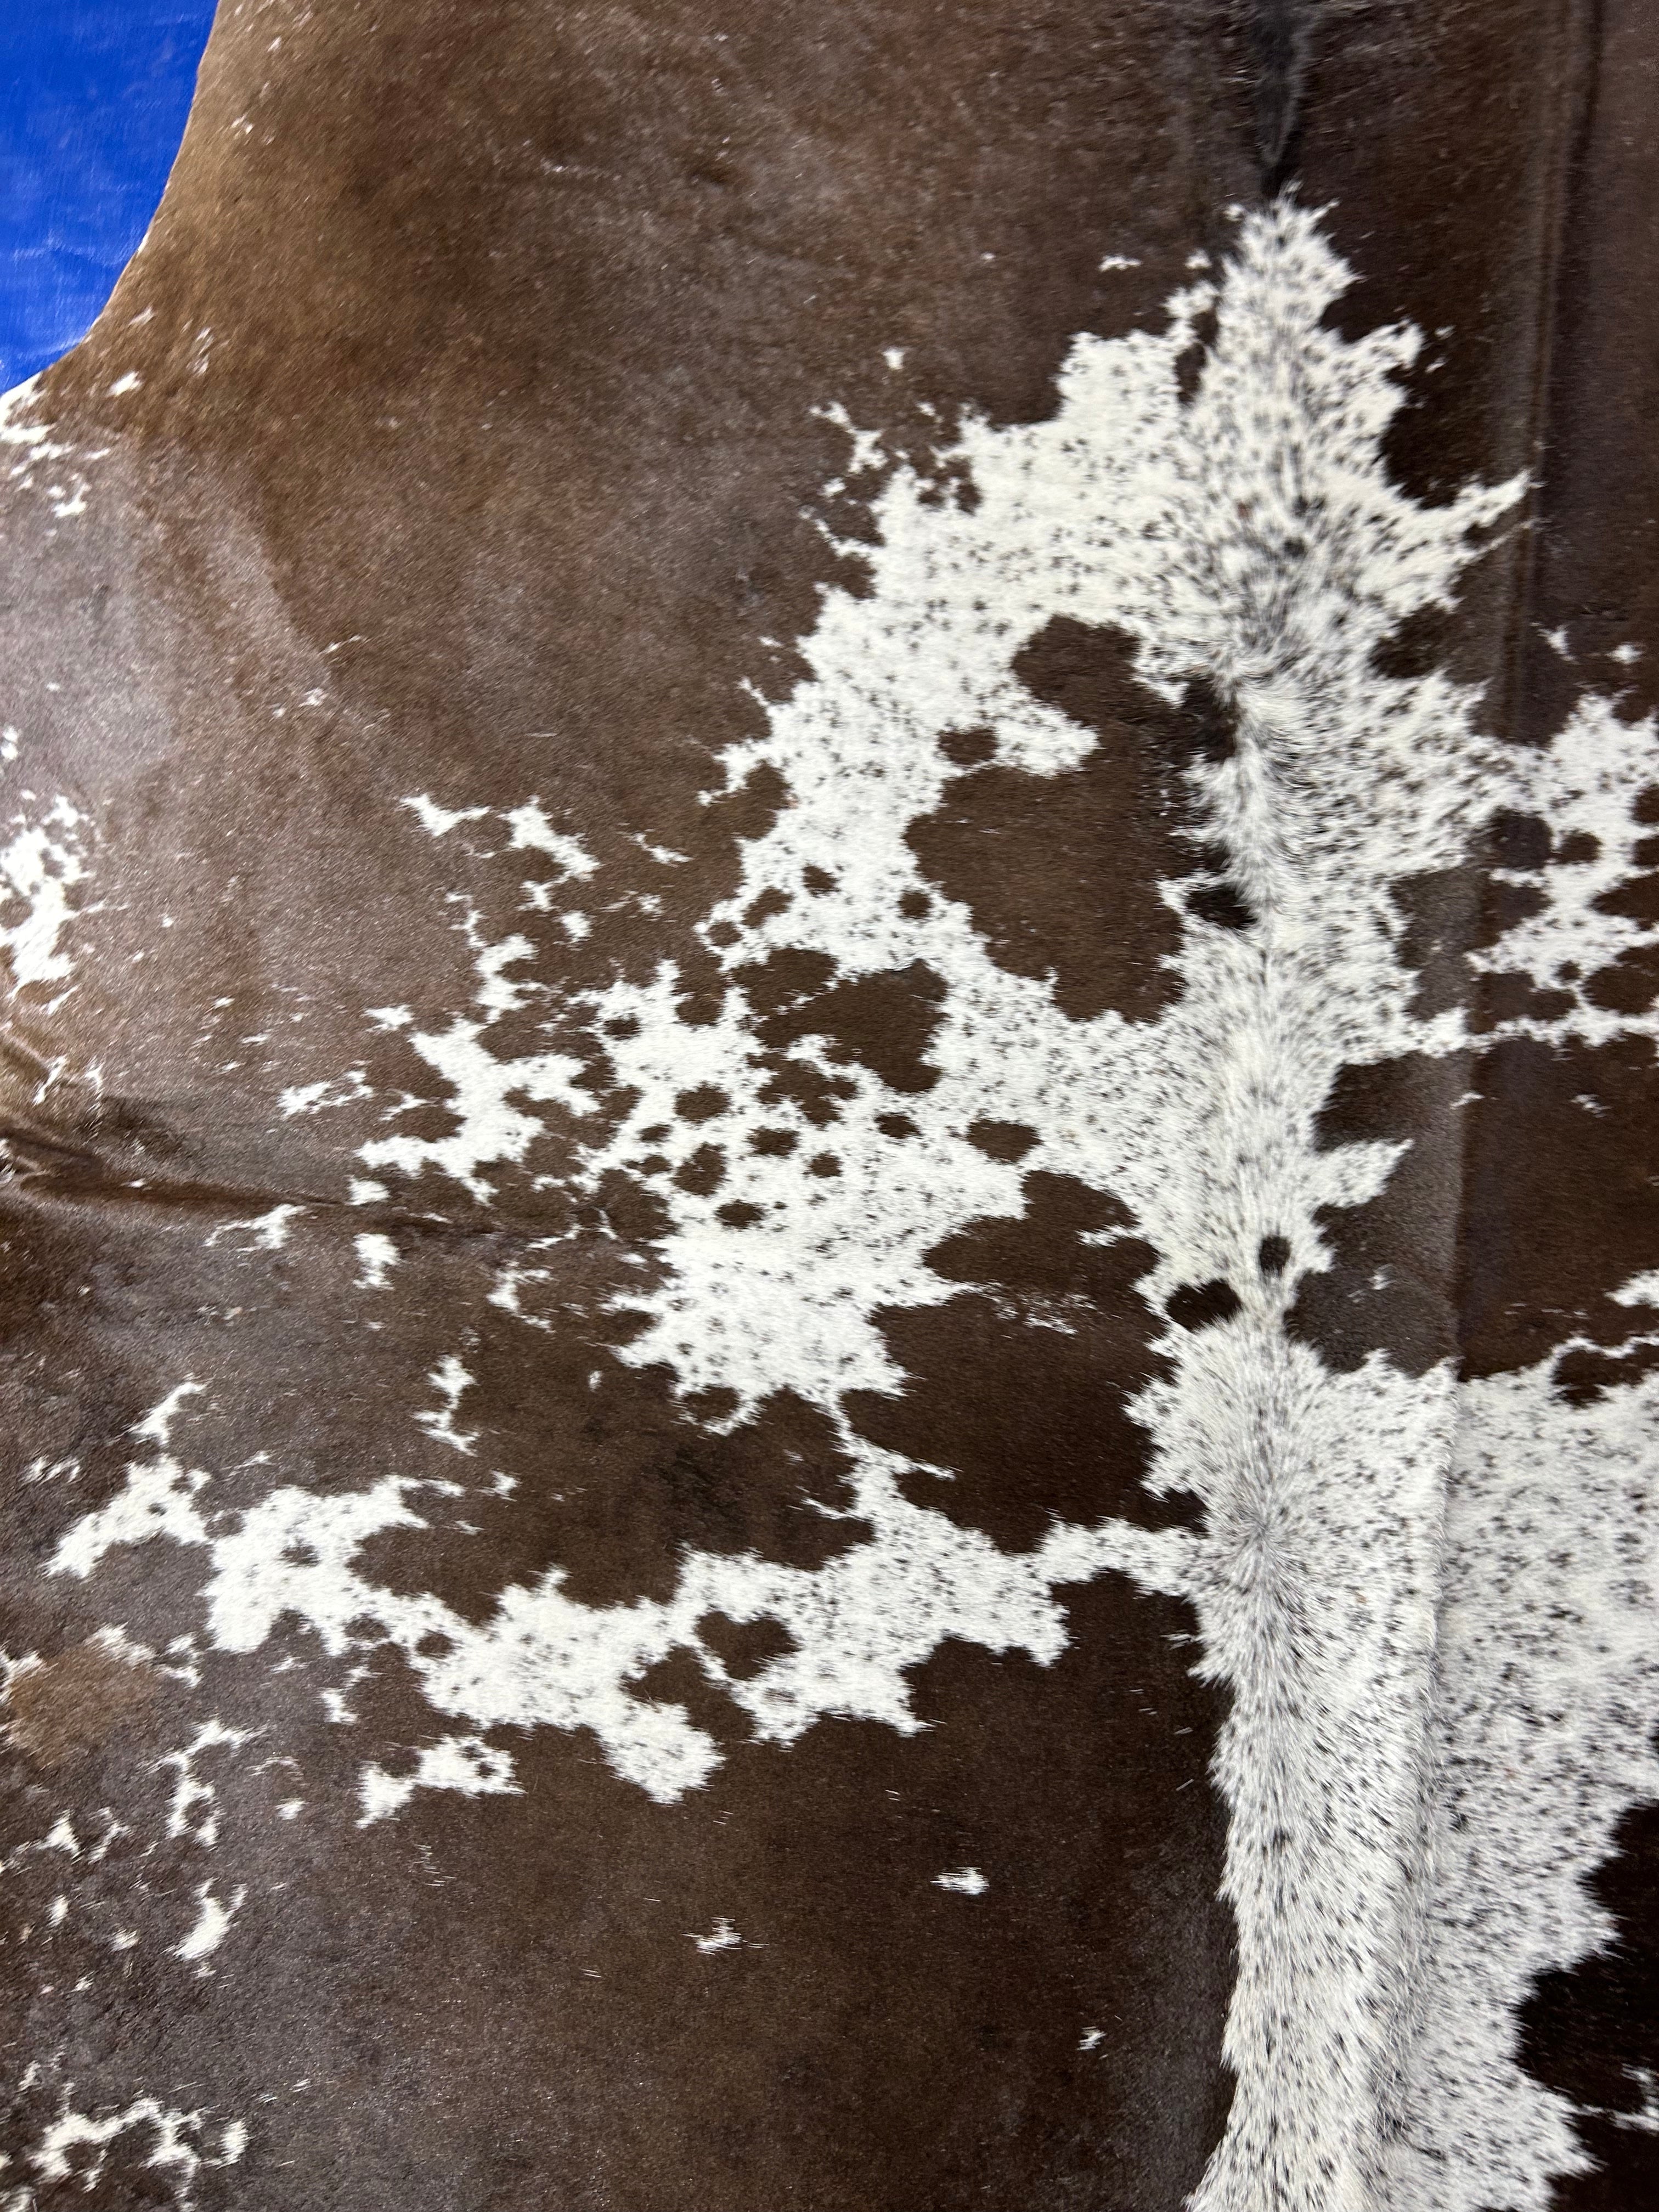 Brown & White Spotted Cowhide Rug Size: 8x6.2 feet D-050